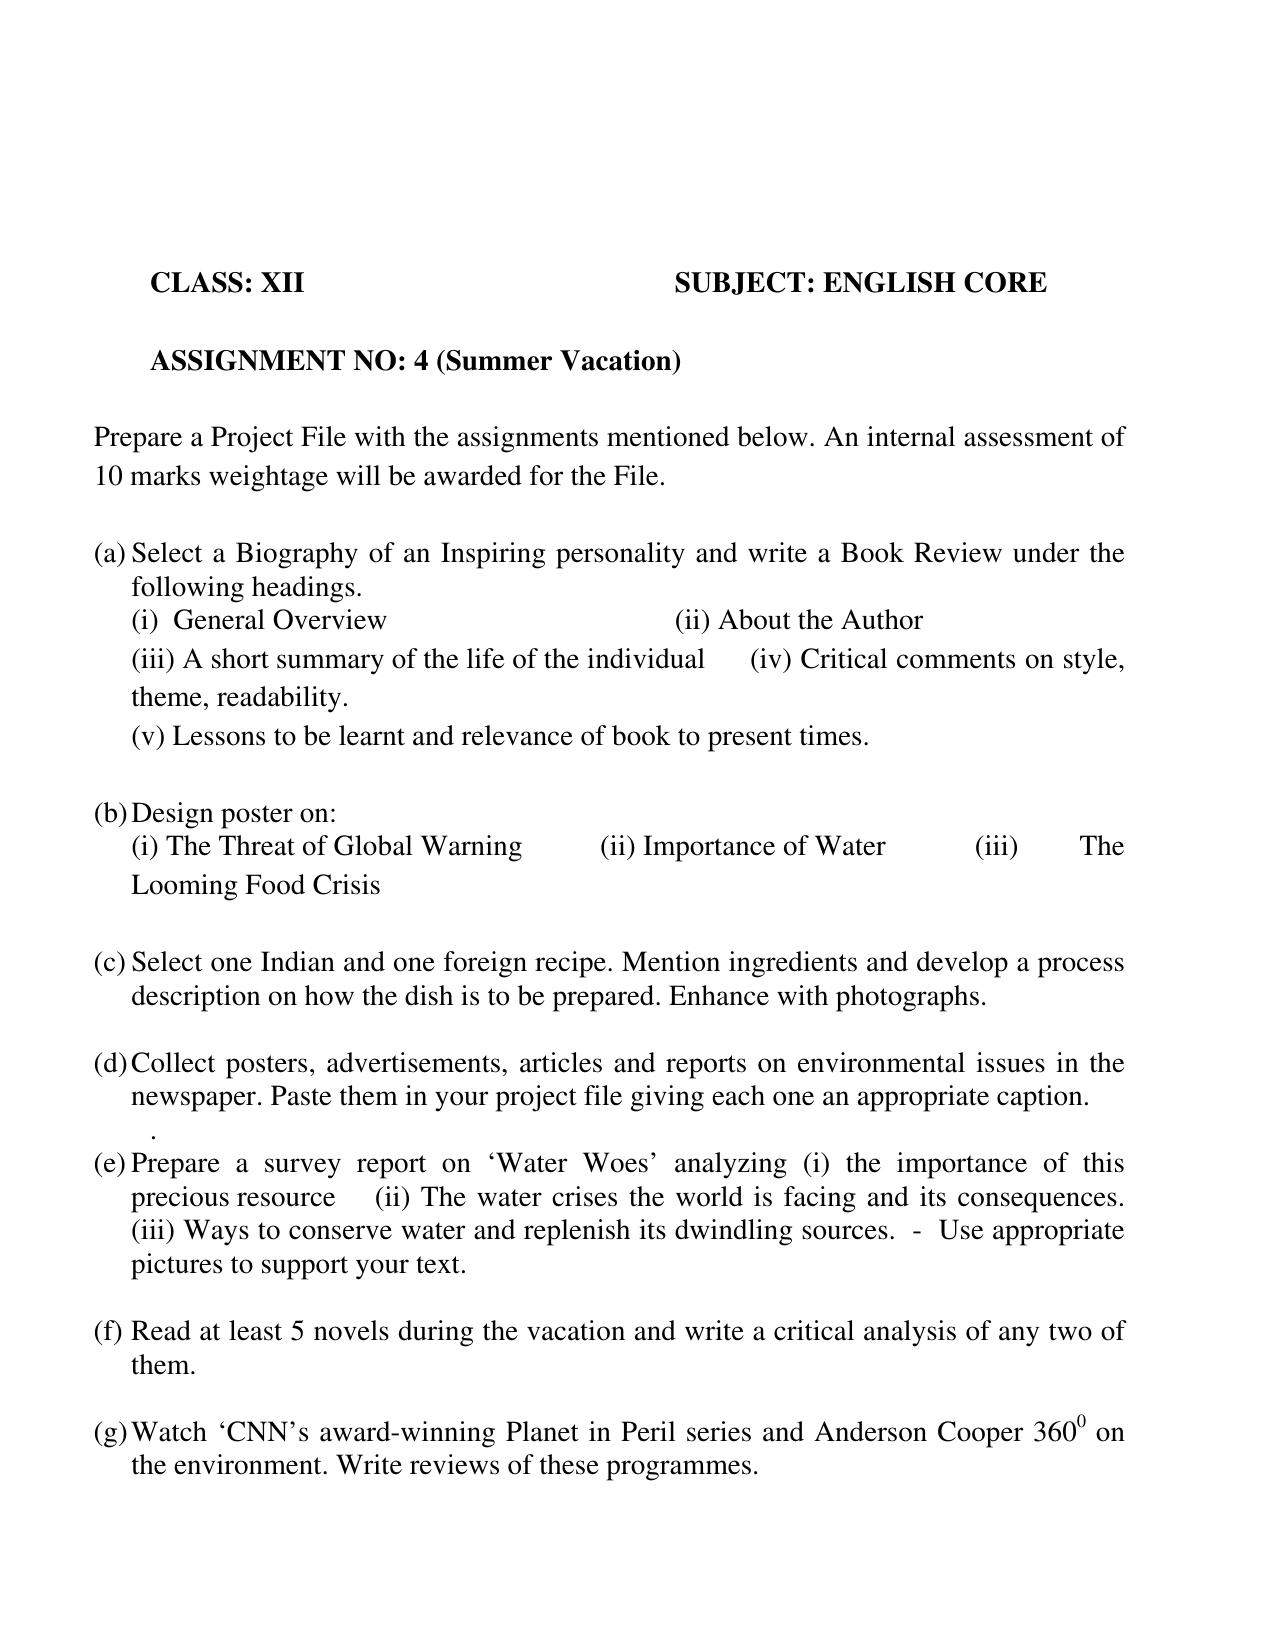 CBSE Class 12 English Core Assignment 4 - Page 1